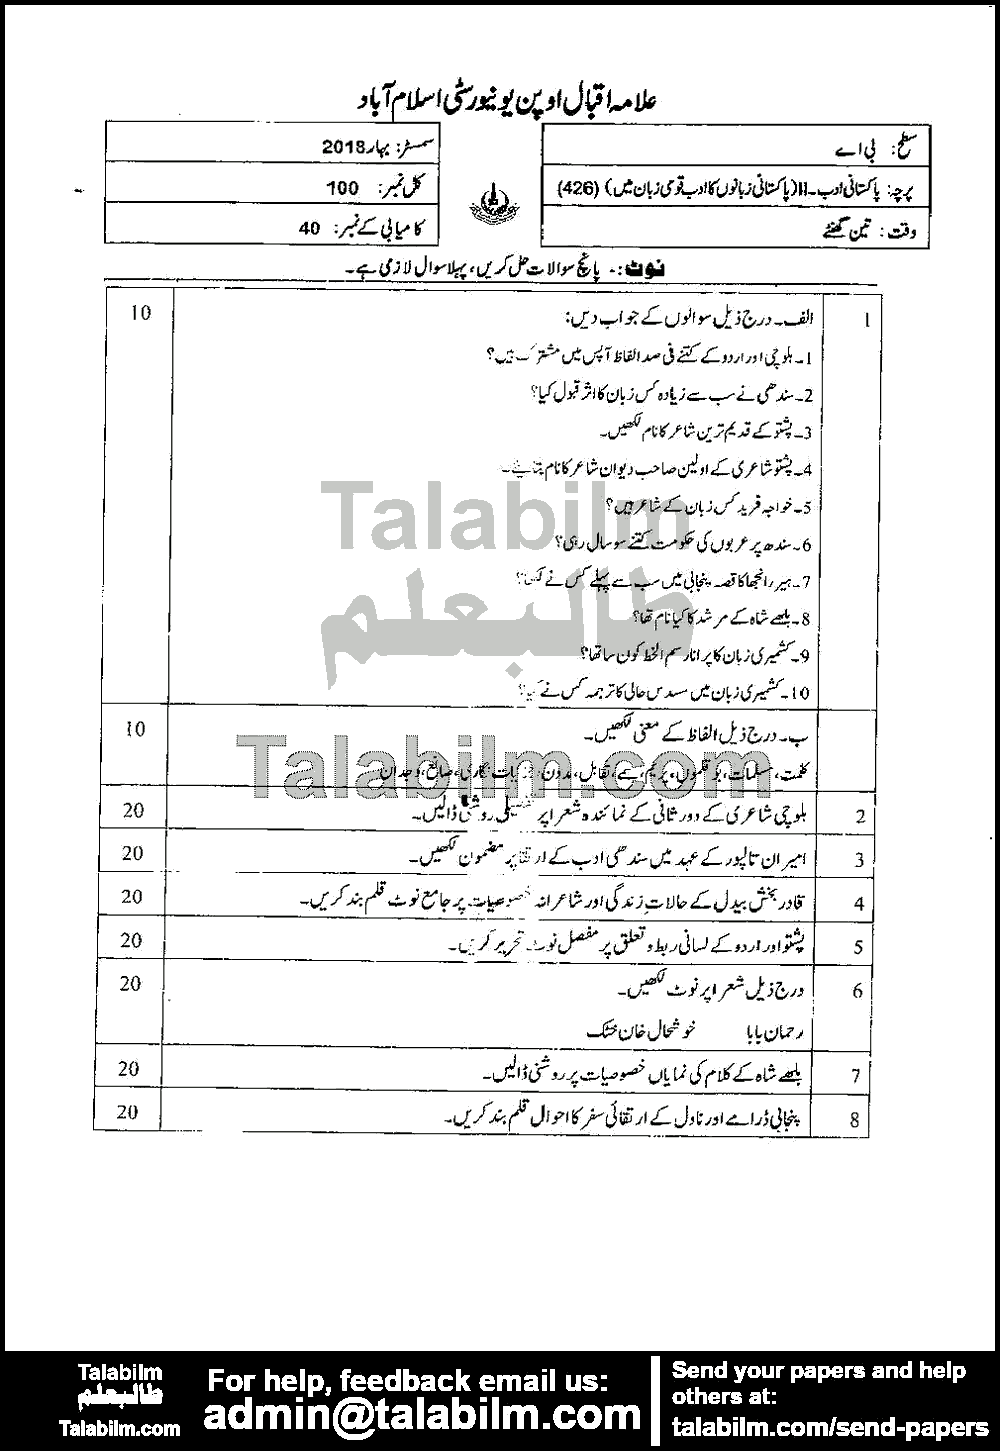 Pakistani Adab-II 426 past paper for Spring 2018